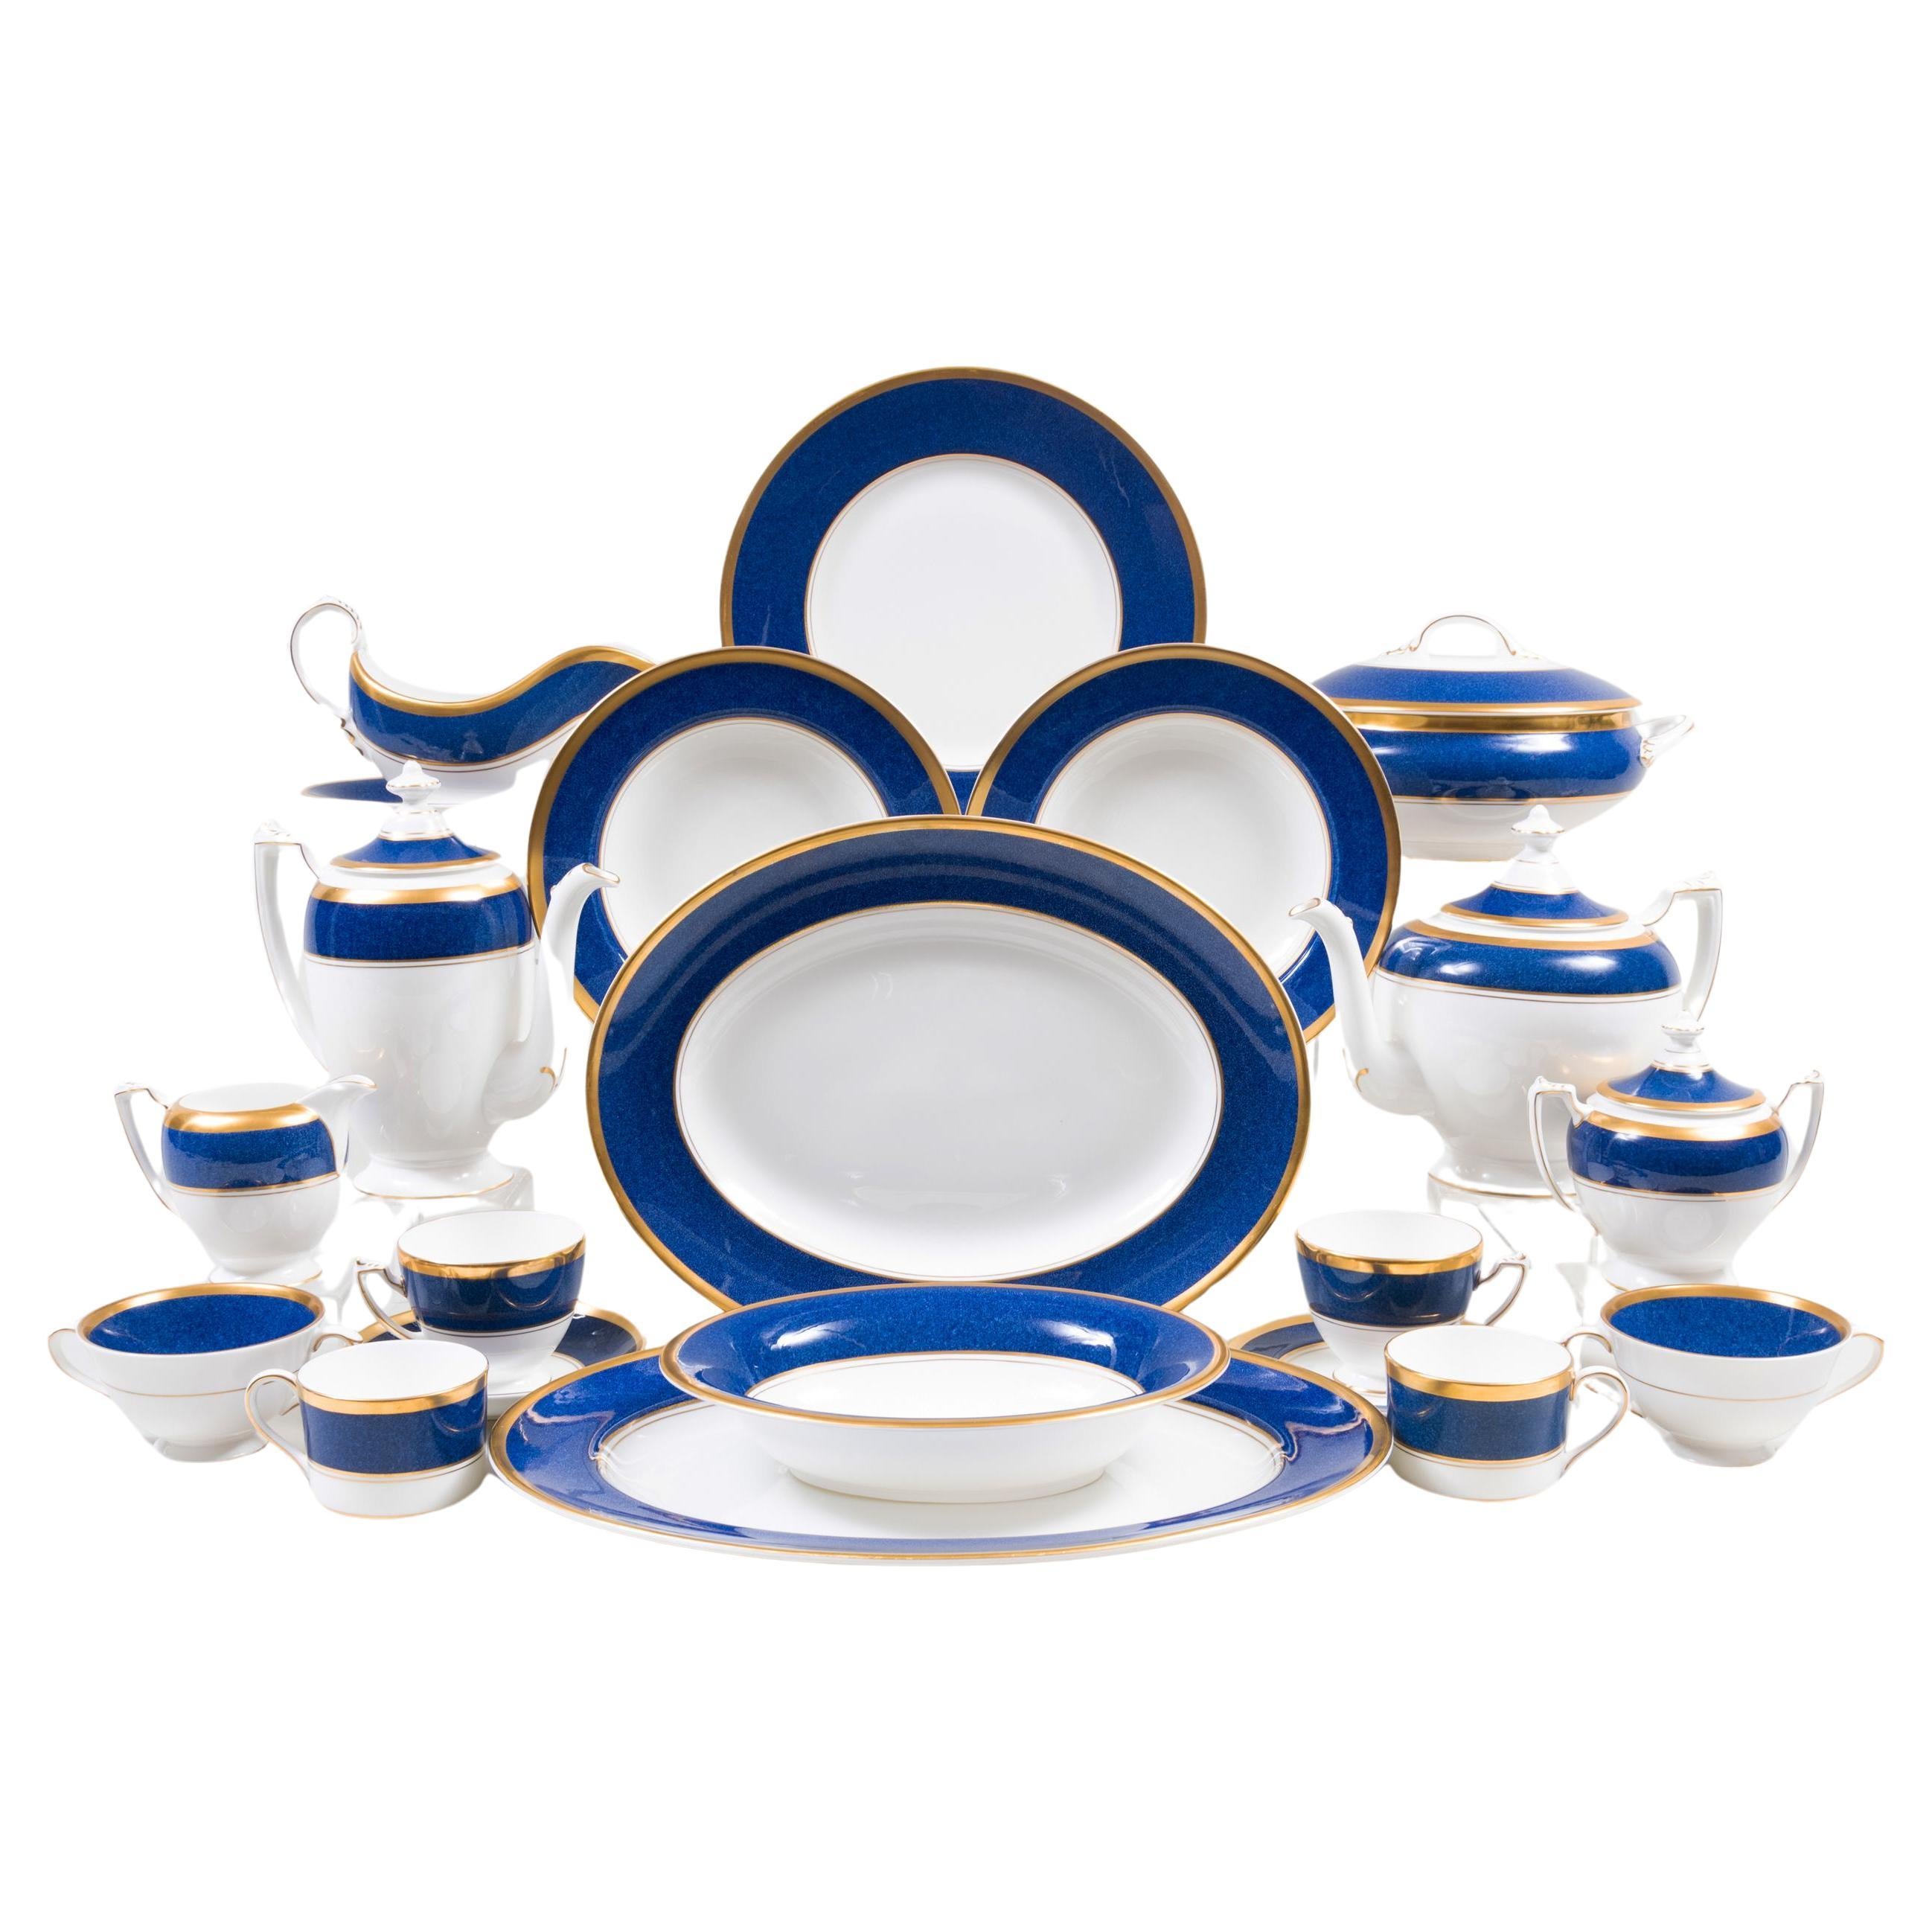 Complete English Porcelain Dinner Service For 12 People With Coffee/Tea Service For Sale